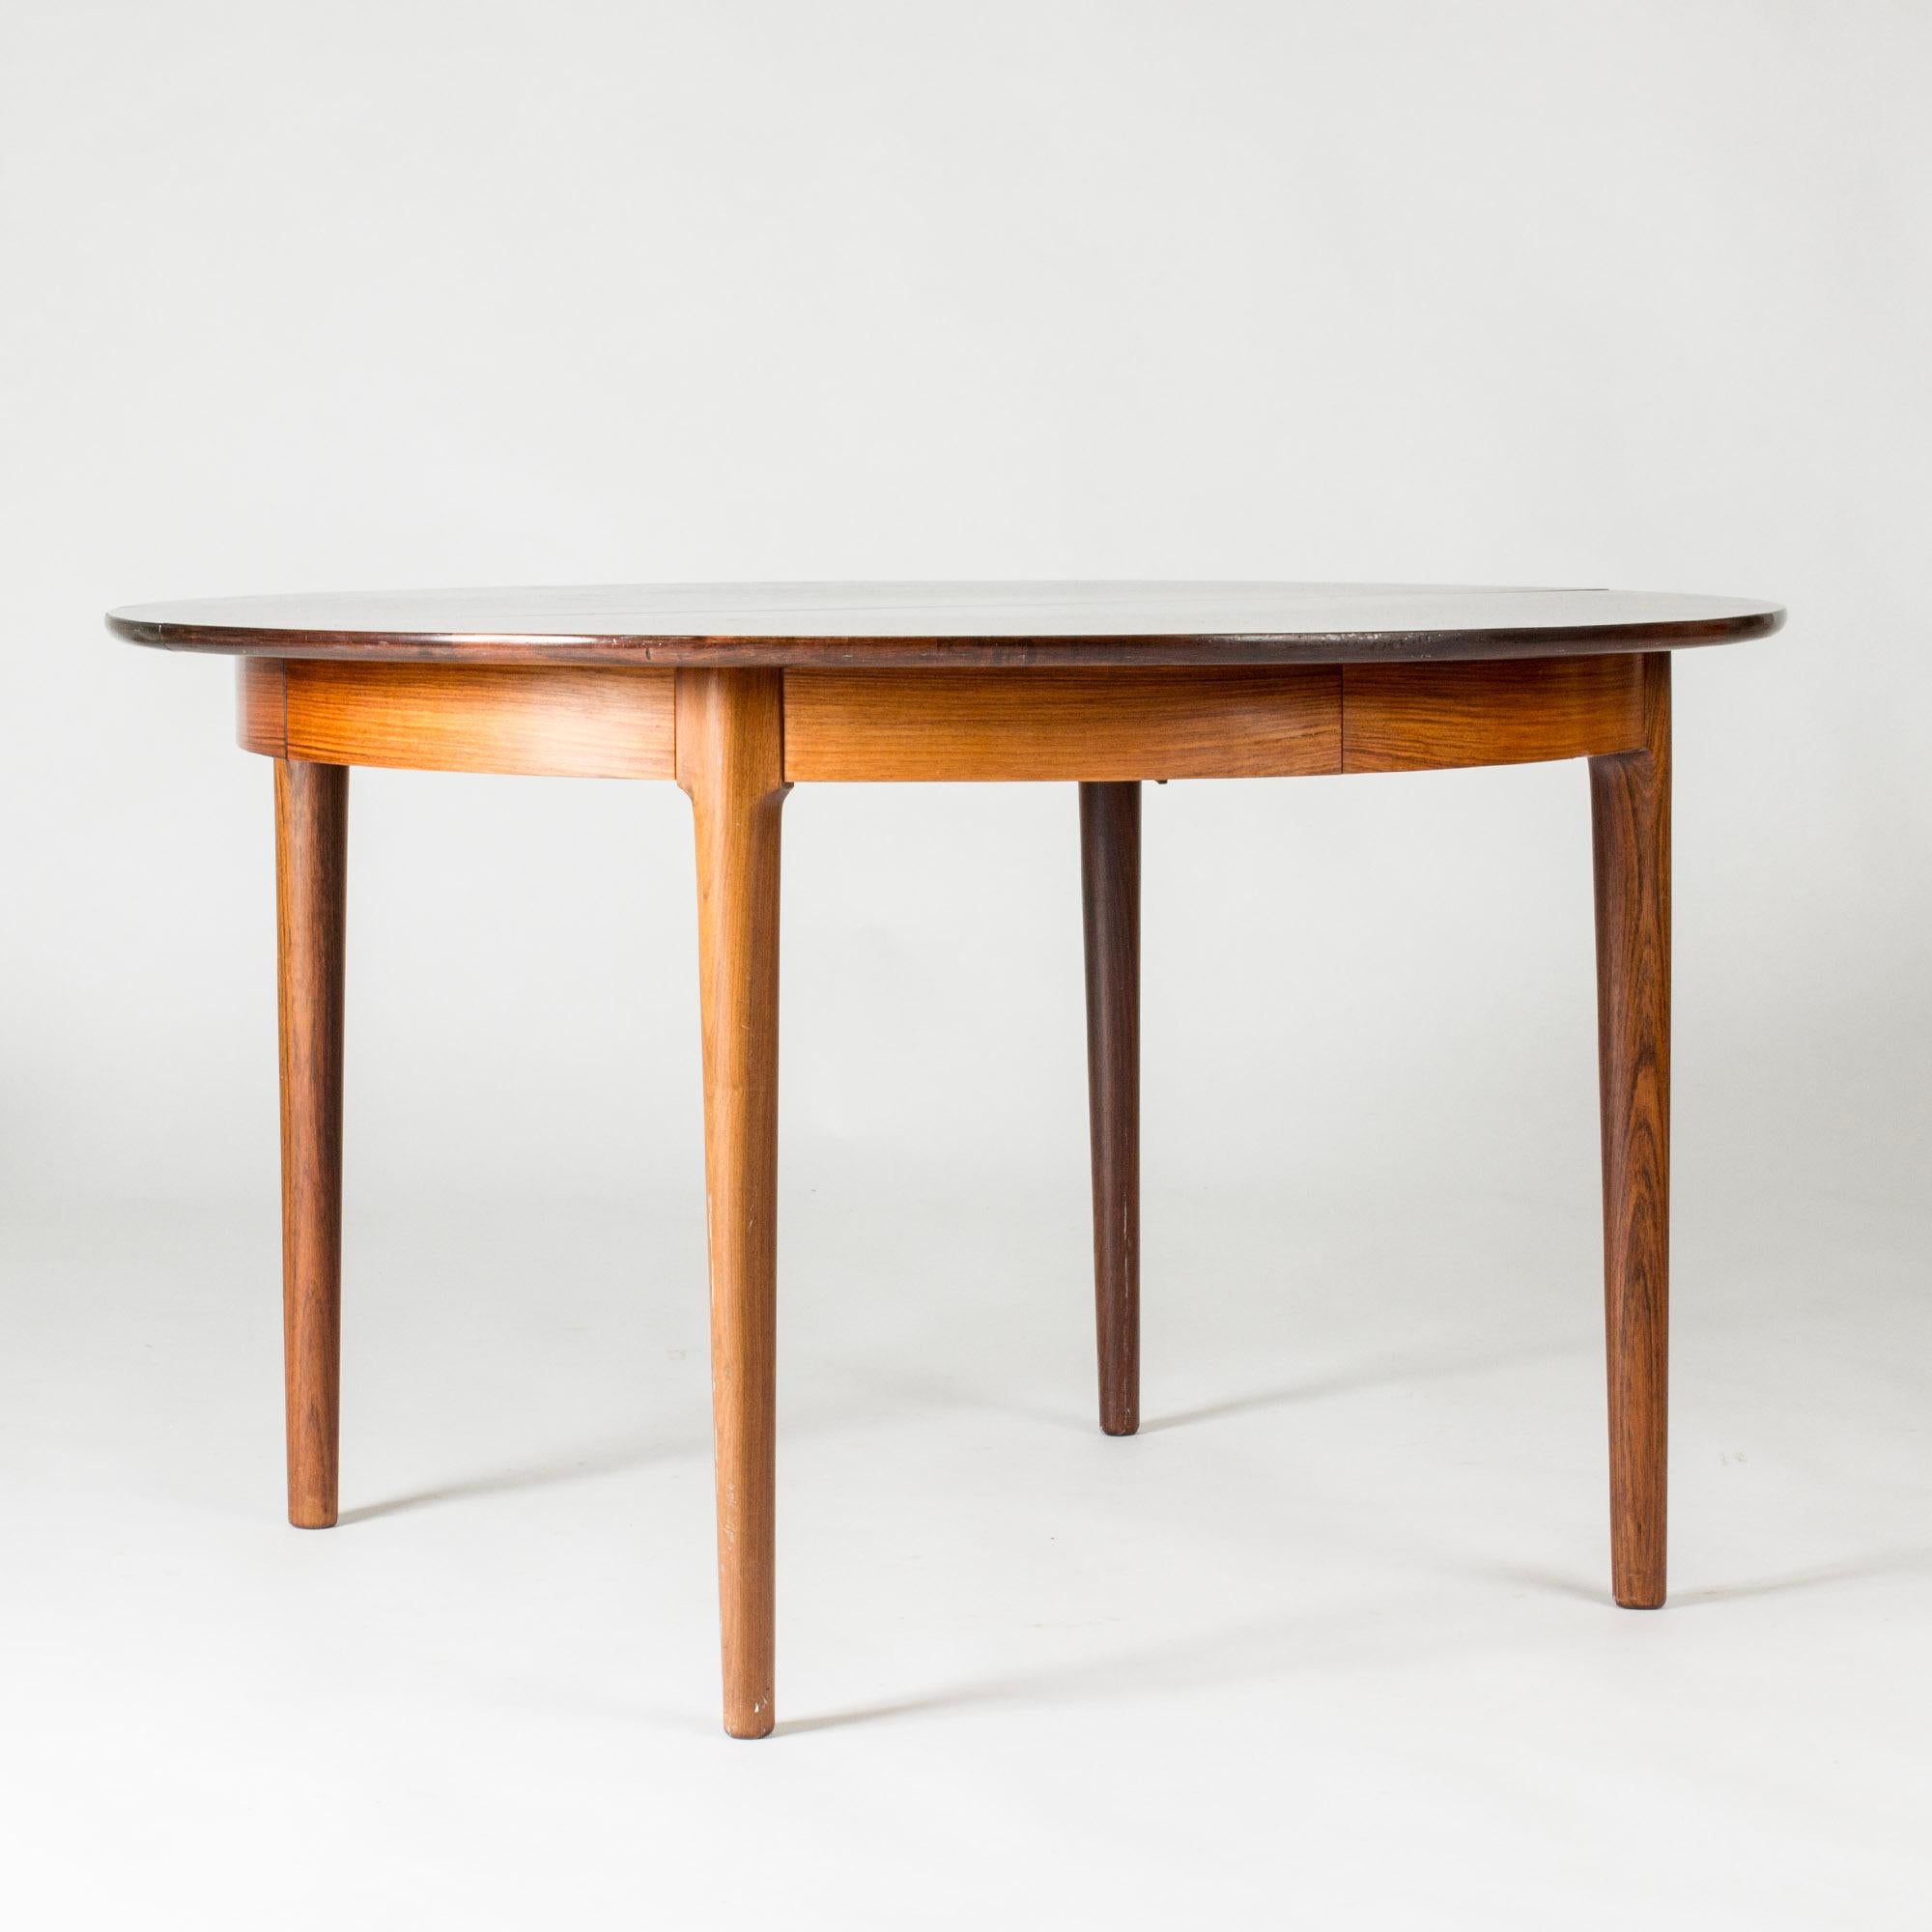 Elegant rosewood dining table by Torbjørn Afdal, sleek and versatile with beautiful rich brown veneer. A versatile table that extends from a round table for four, in an up to 360 cm long table that fits twelve people comfortably.

Width 120 cm + 55